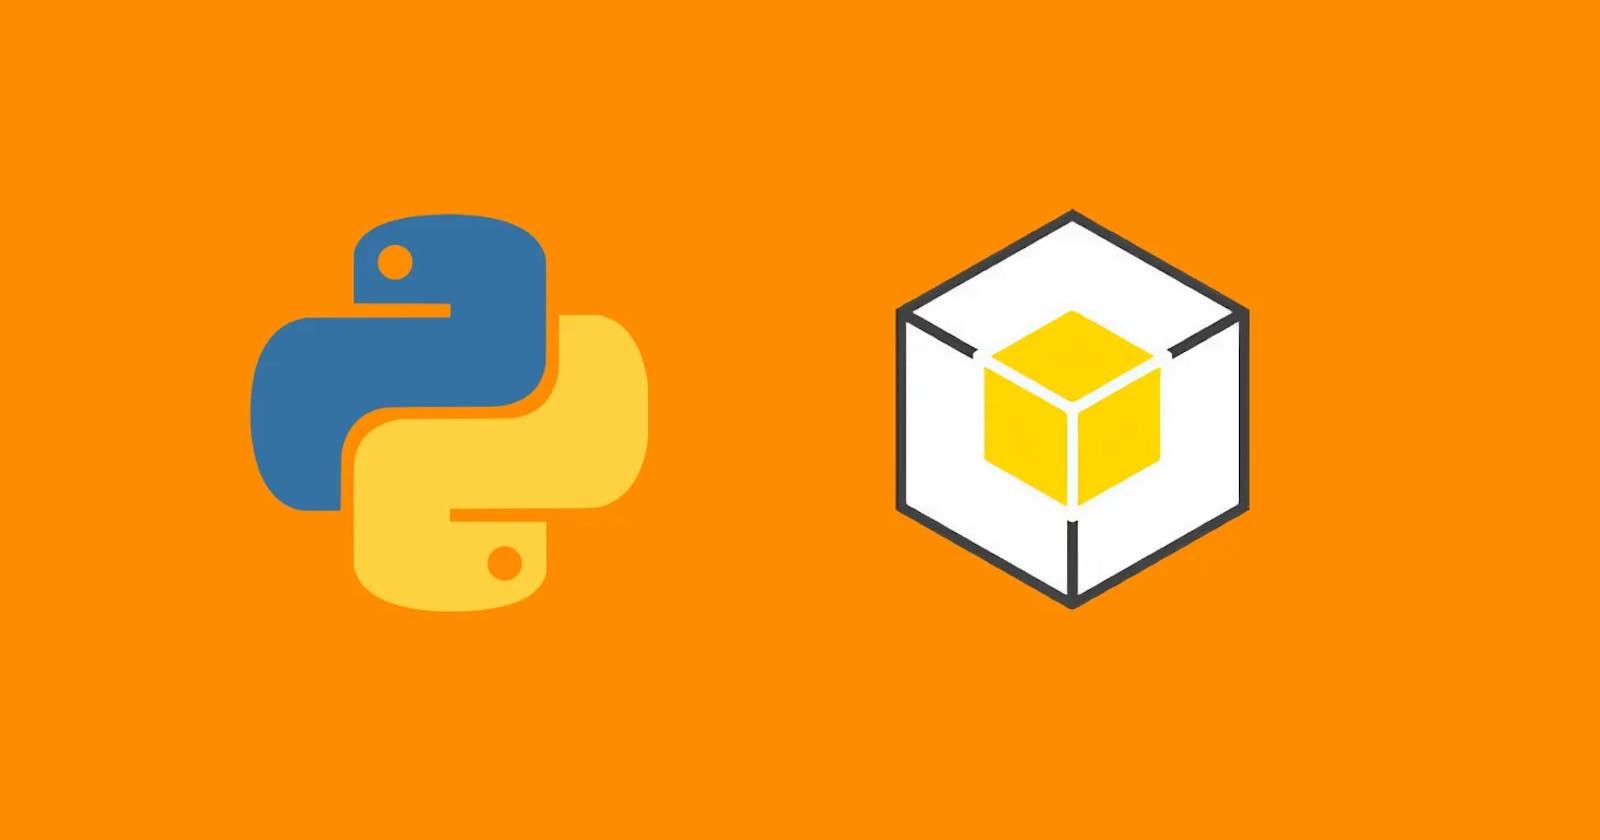 Find resources associated to a security group in AWS using Boto3